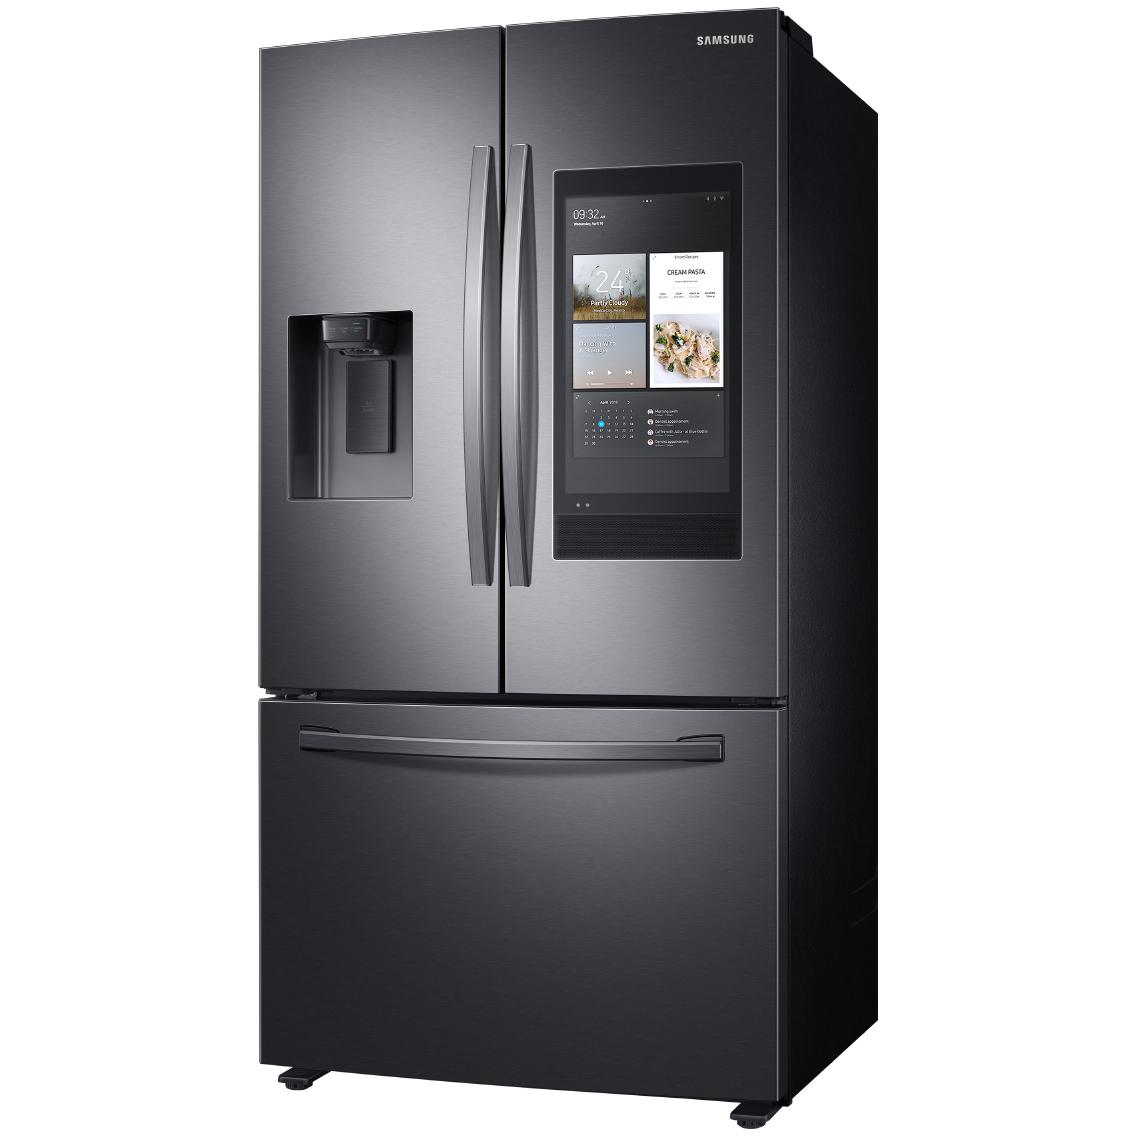 Samsung 36-inch, 27 cu. ft. French 3-Door Refrigerator with Family Hub? RF27T5501SG/AA